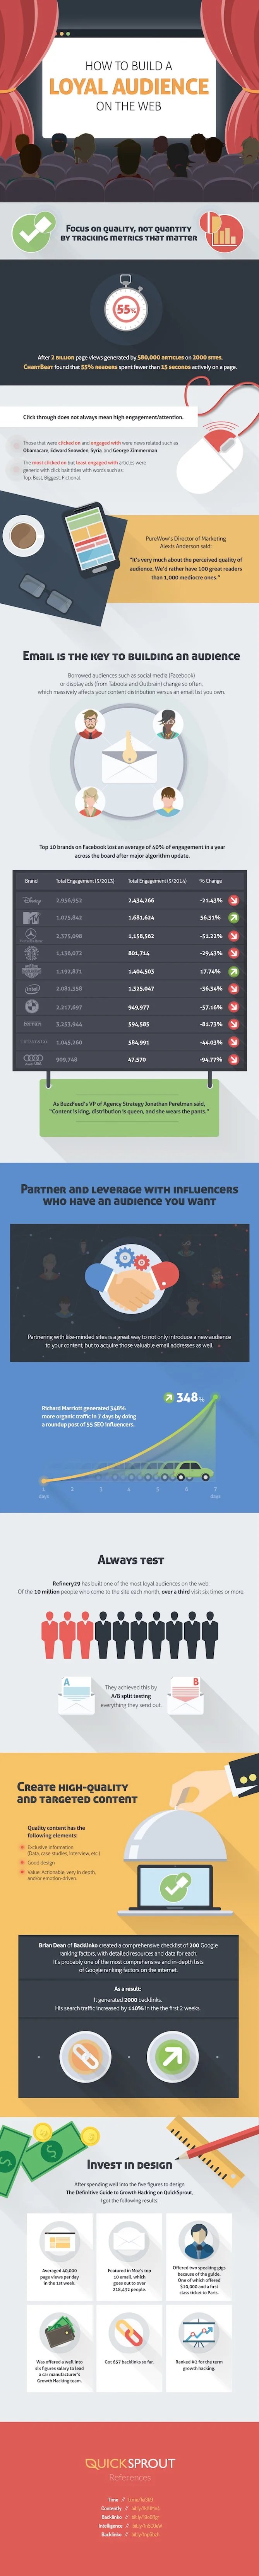 build loyal audience infographic